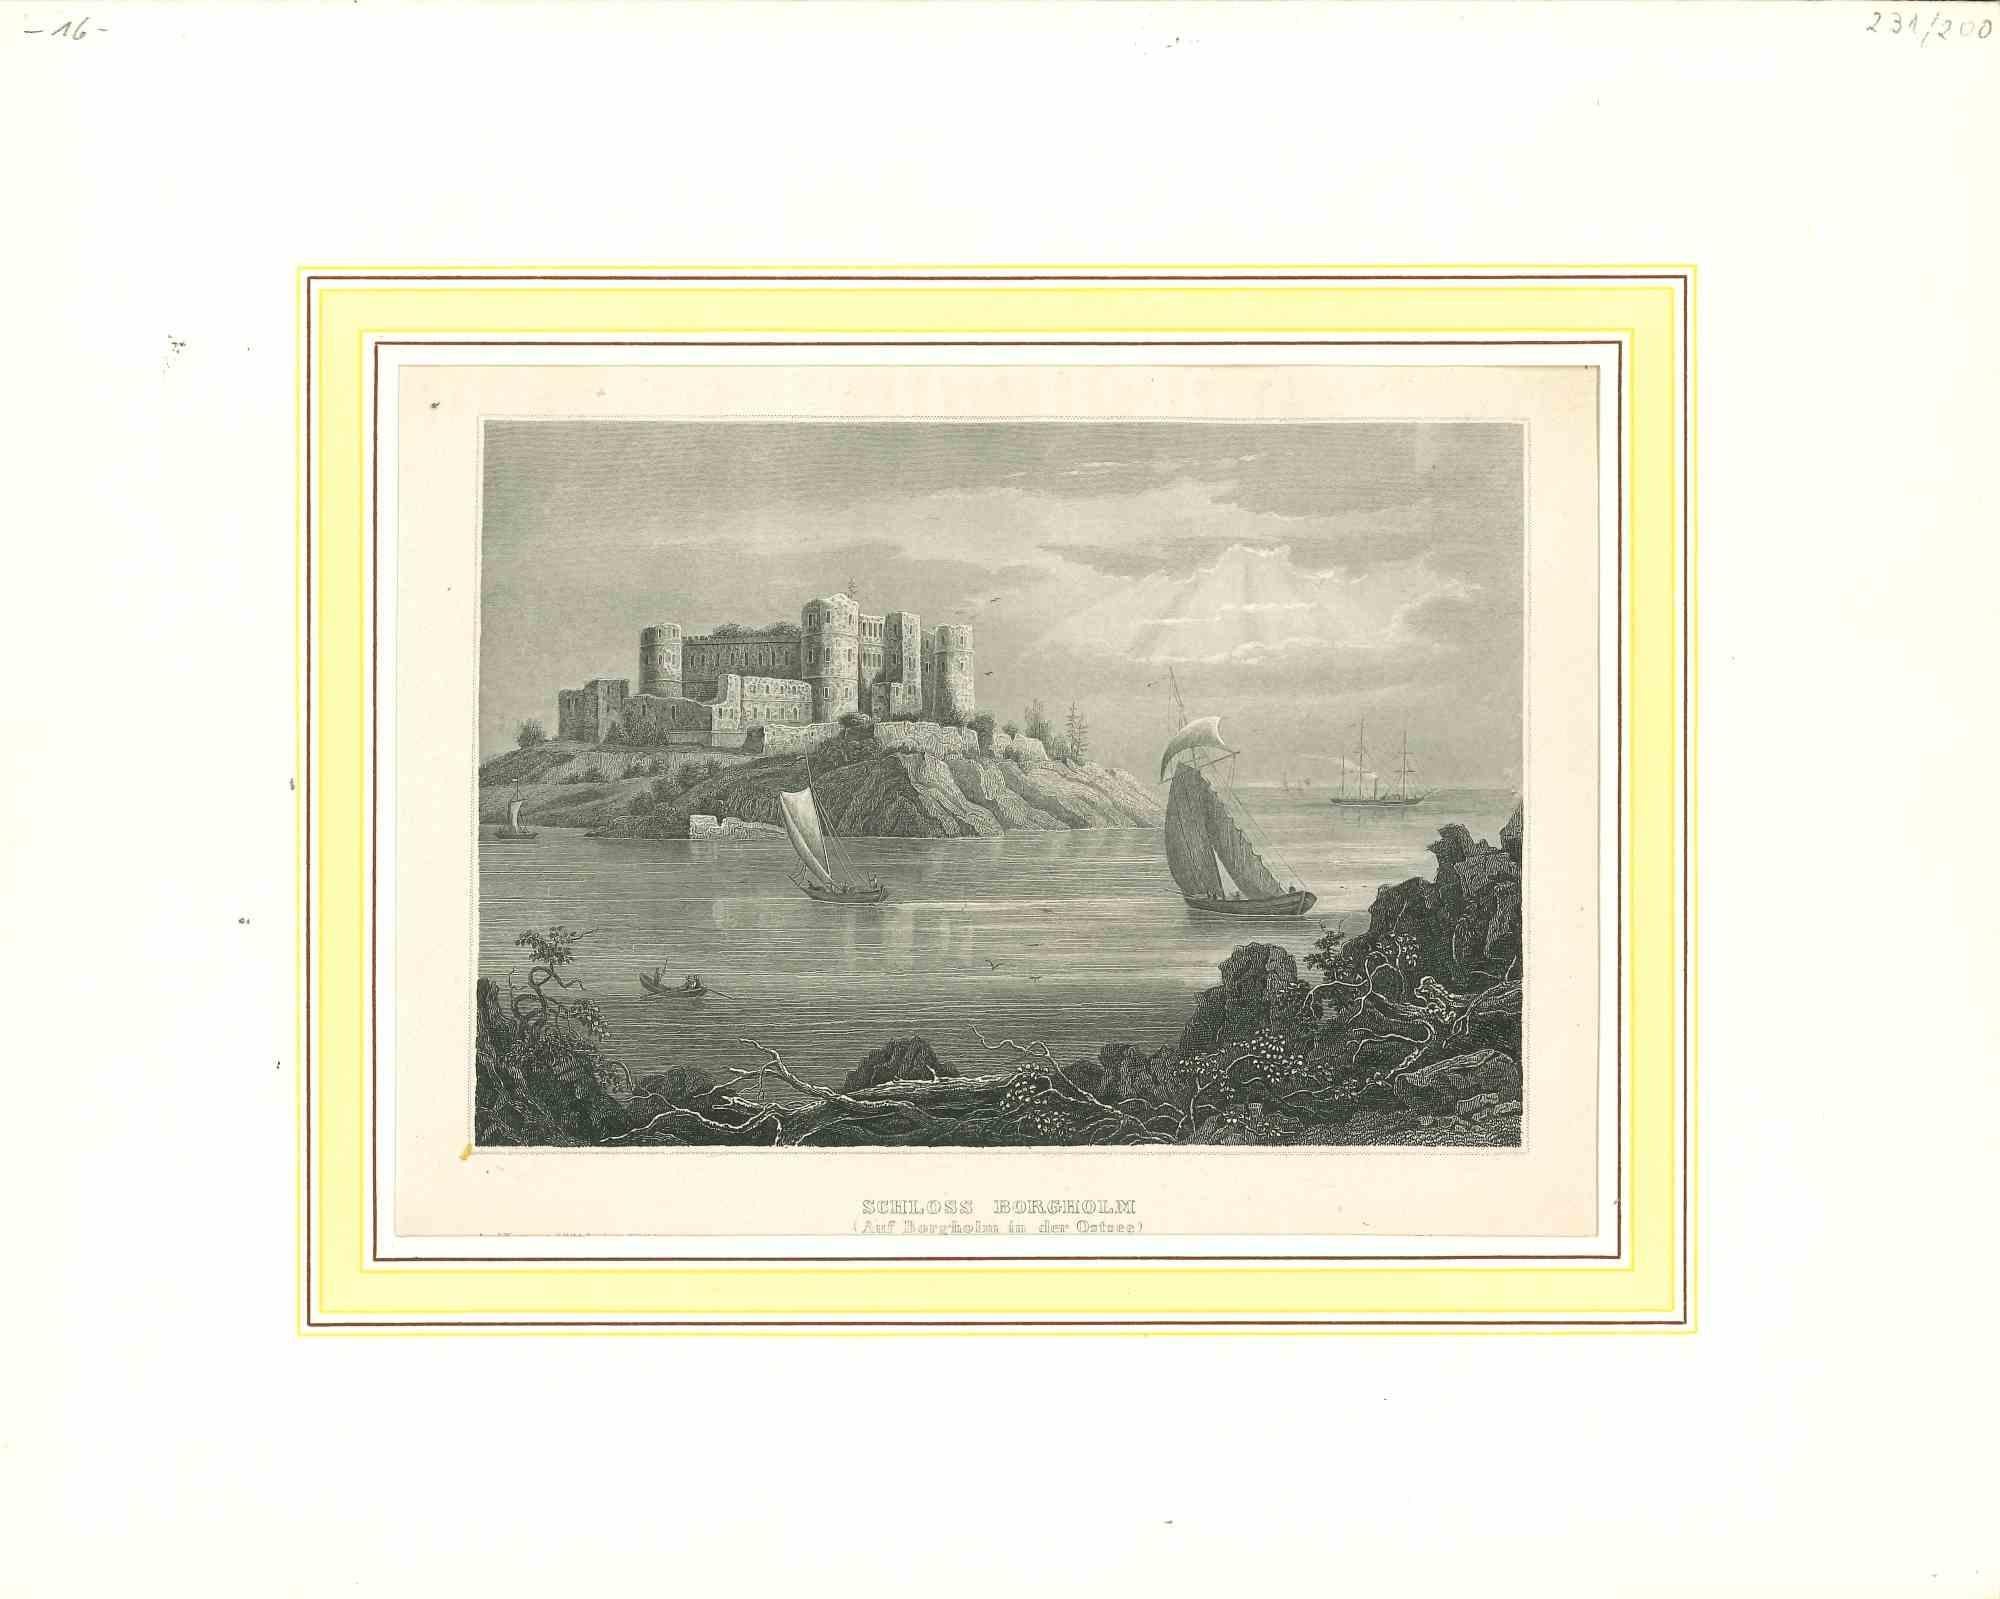 Ancient View of Schloss Borgholm - Original Lithograph - Early 19th Century